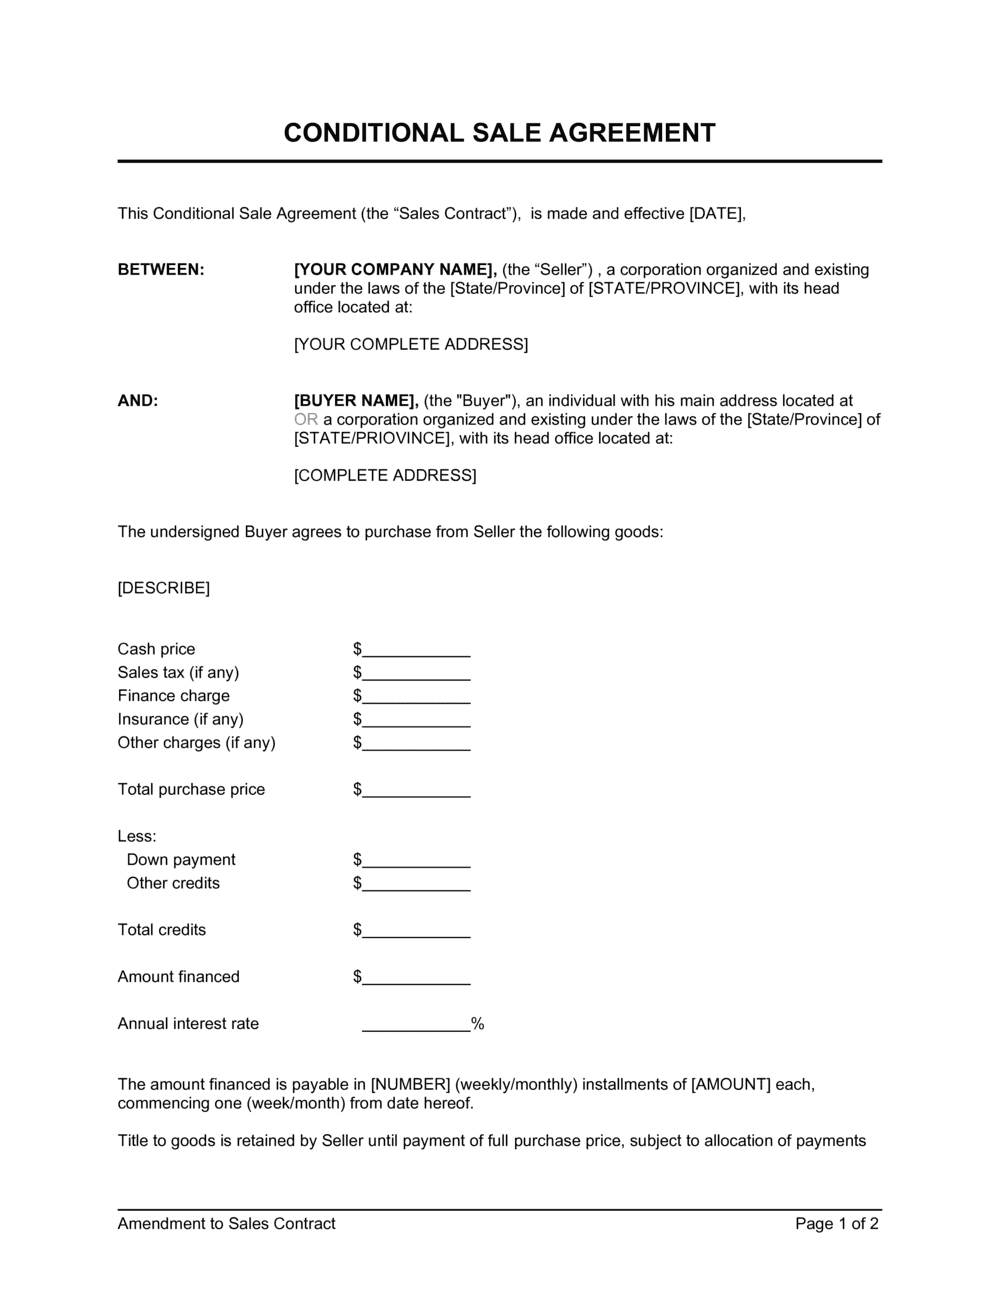 conditional assignment agreement